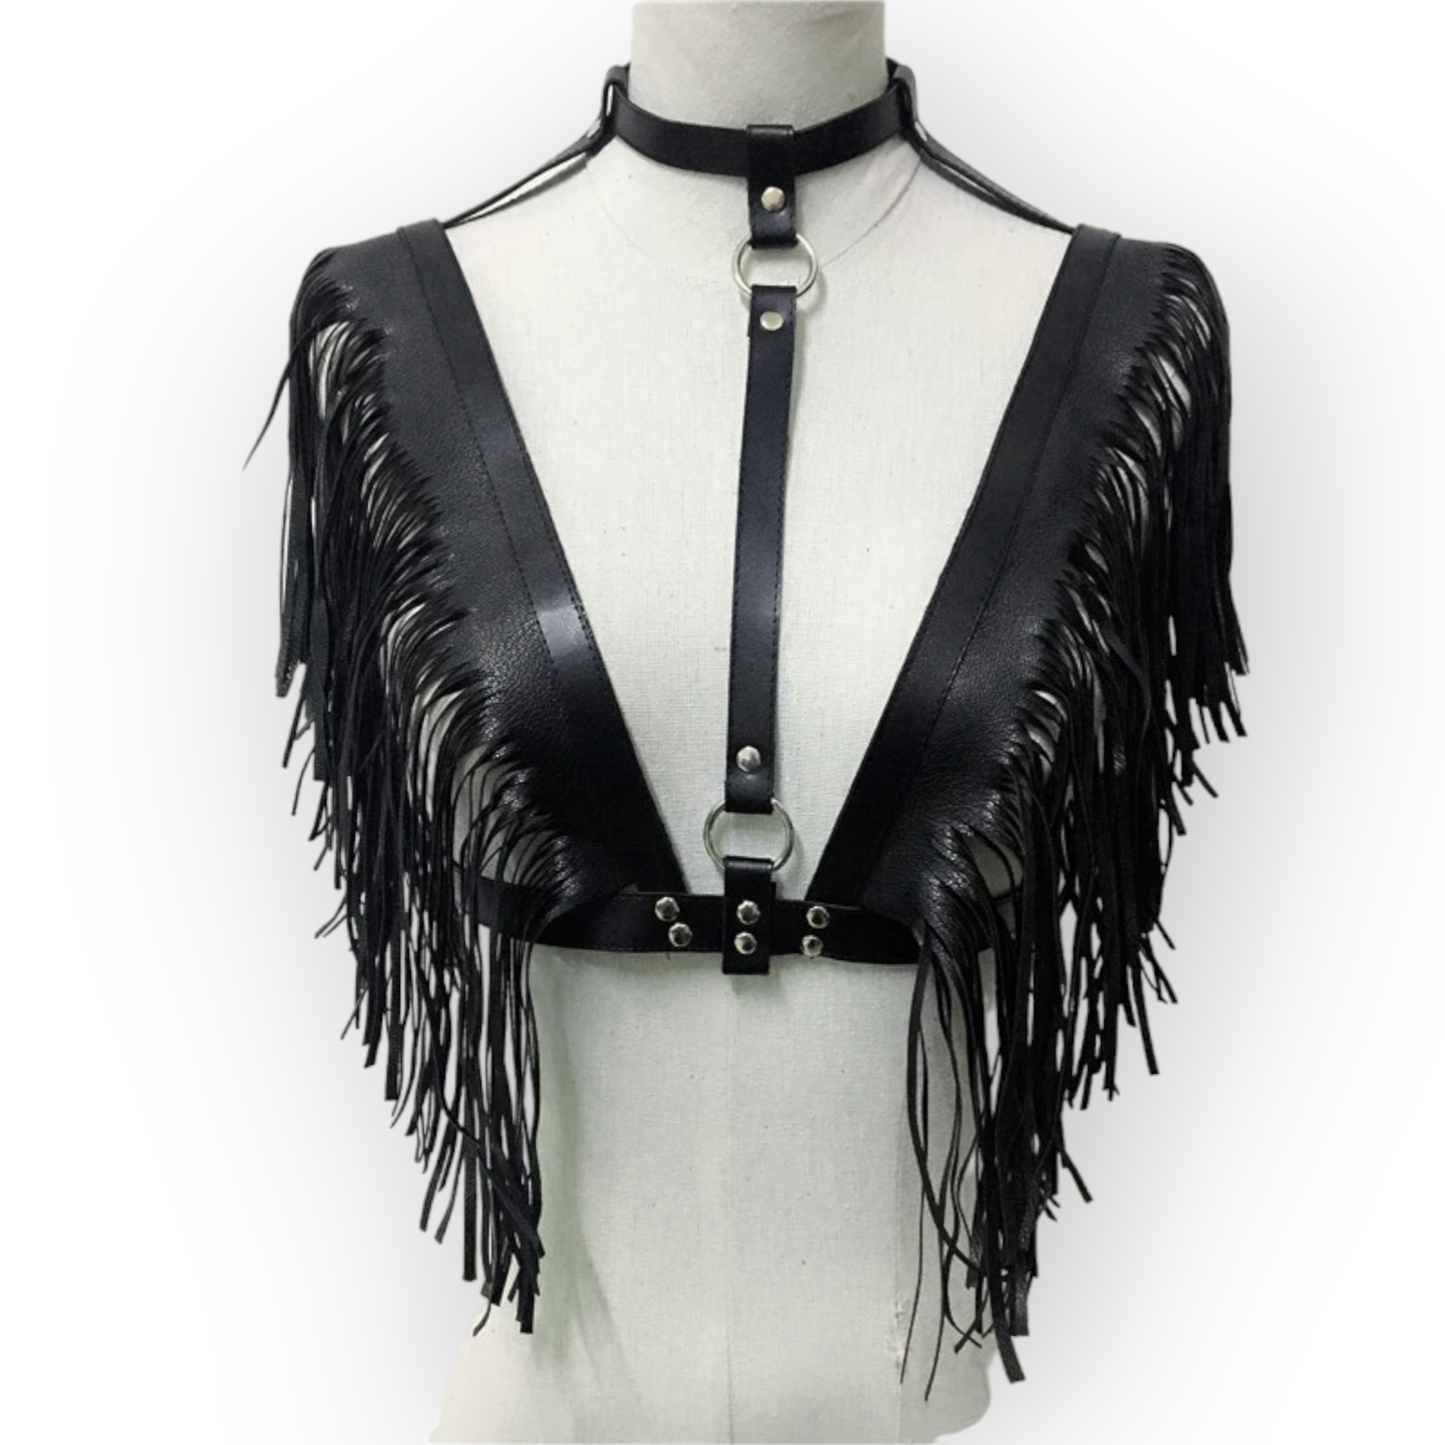 Leather Harness Black with fringes - Rave apparel, festival outfit, Rave outfit. 